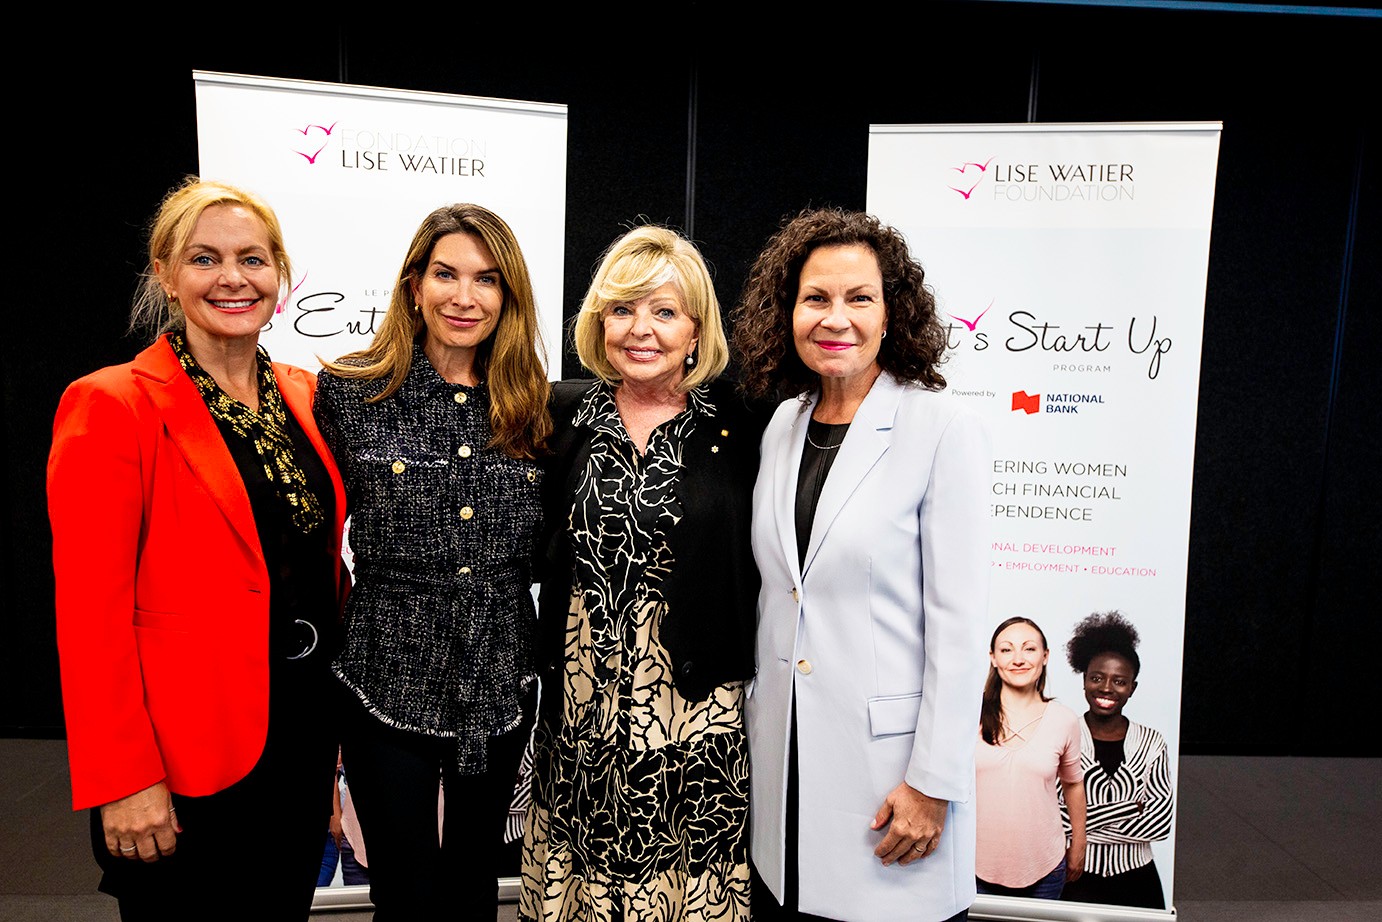 Isabel Dunnigan, Concordia's associate vice-president, lifelong learning, appears with the president & executive director of the Lise Watier Foundation Marie-Lise Andrade, Lise Watier, and Anne-Marie Croteau, dean of John Molson School of Business